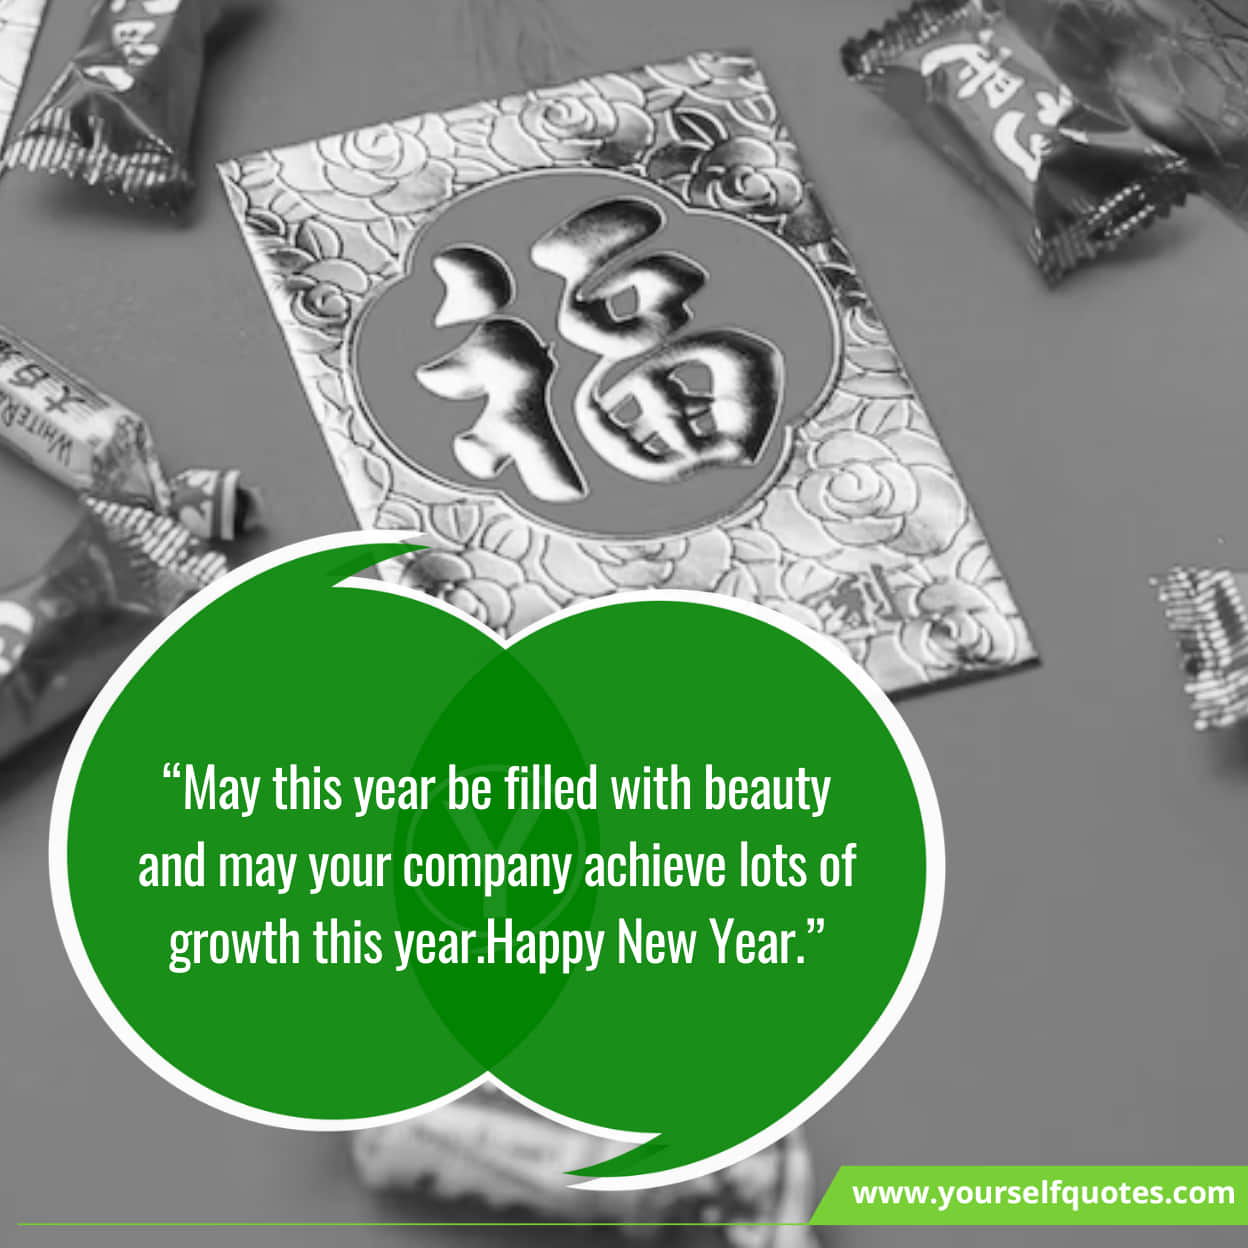 Delighted Business Wishes On Chinese New Year